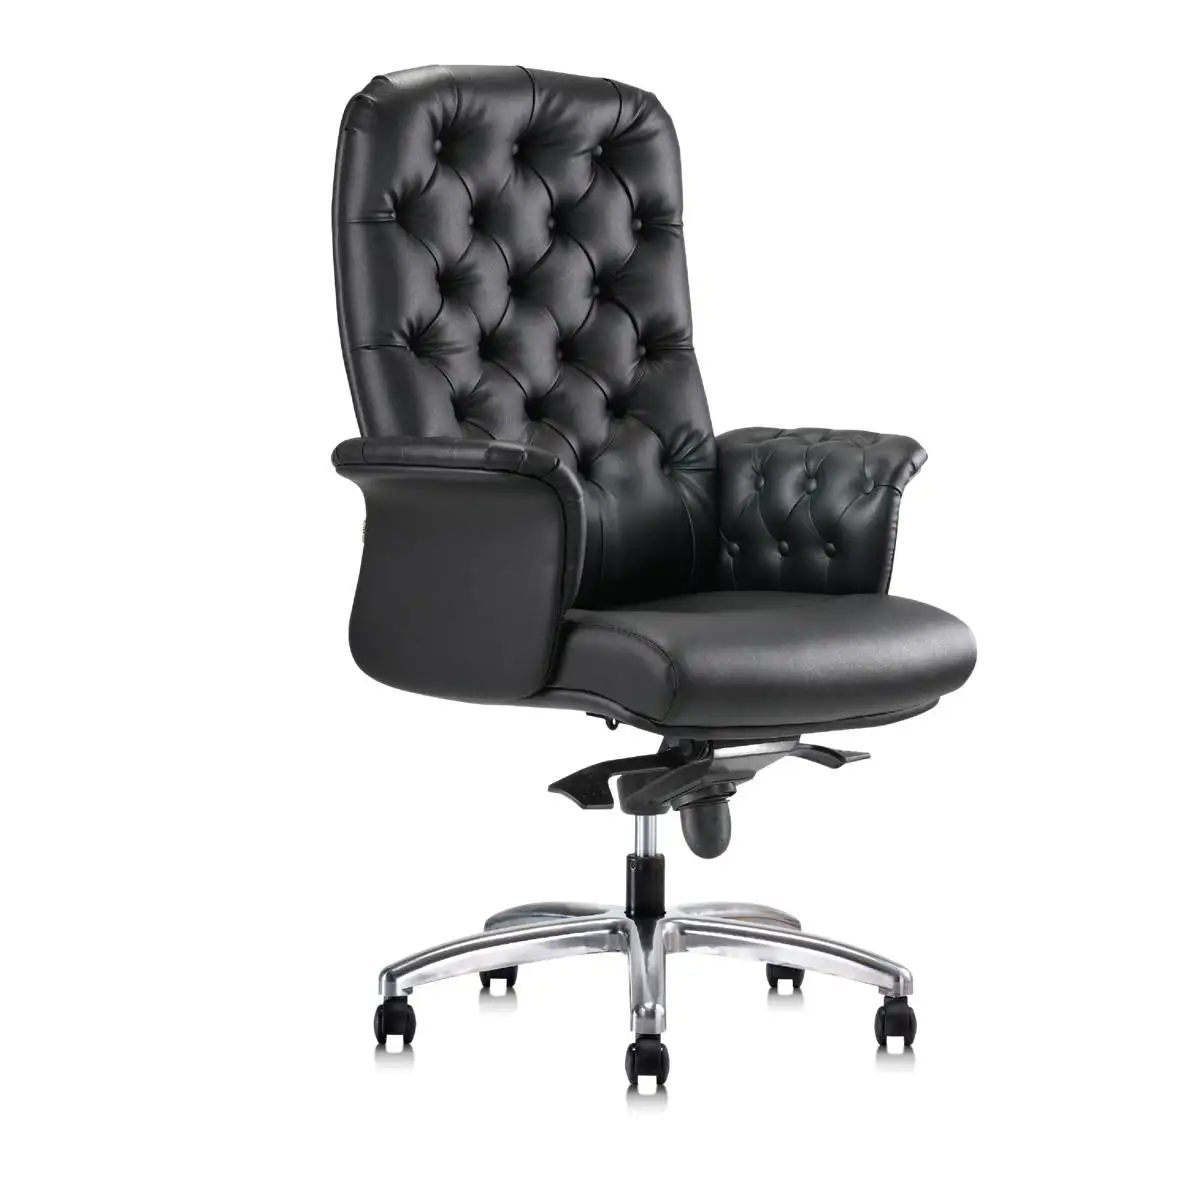 Luxury Classic Office Furniture Till Series Manager Executive High Back Half Genuine Leather Chair Buy Office Chair